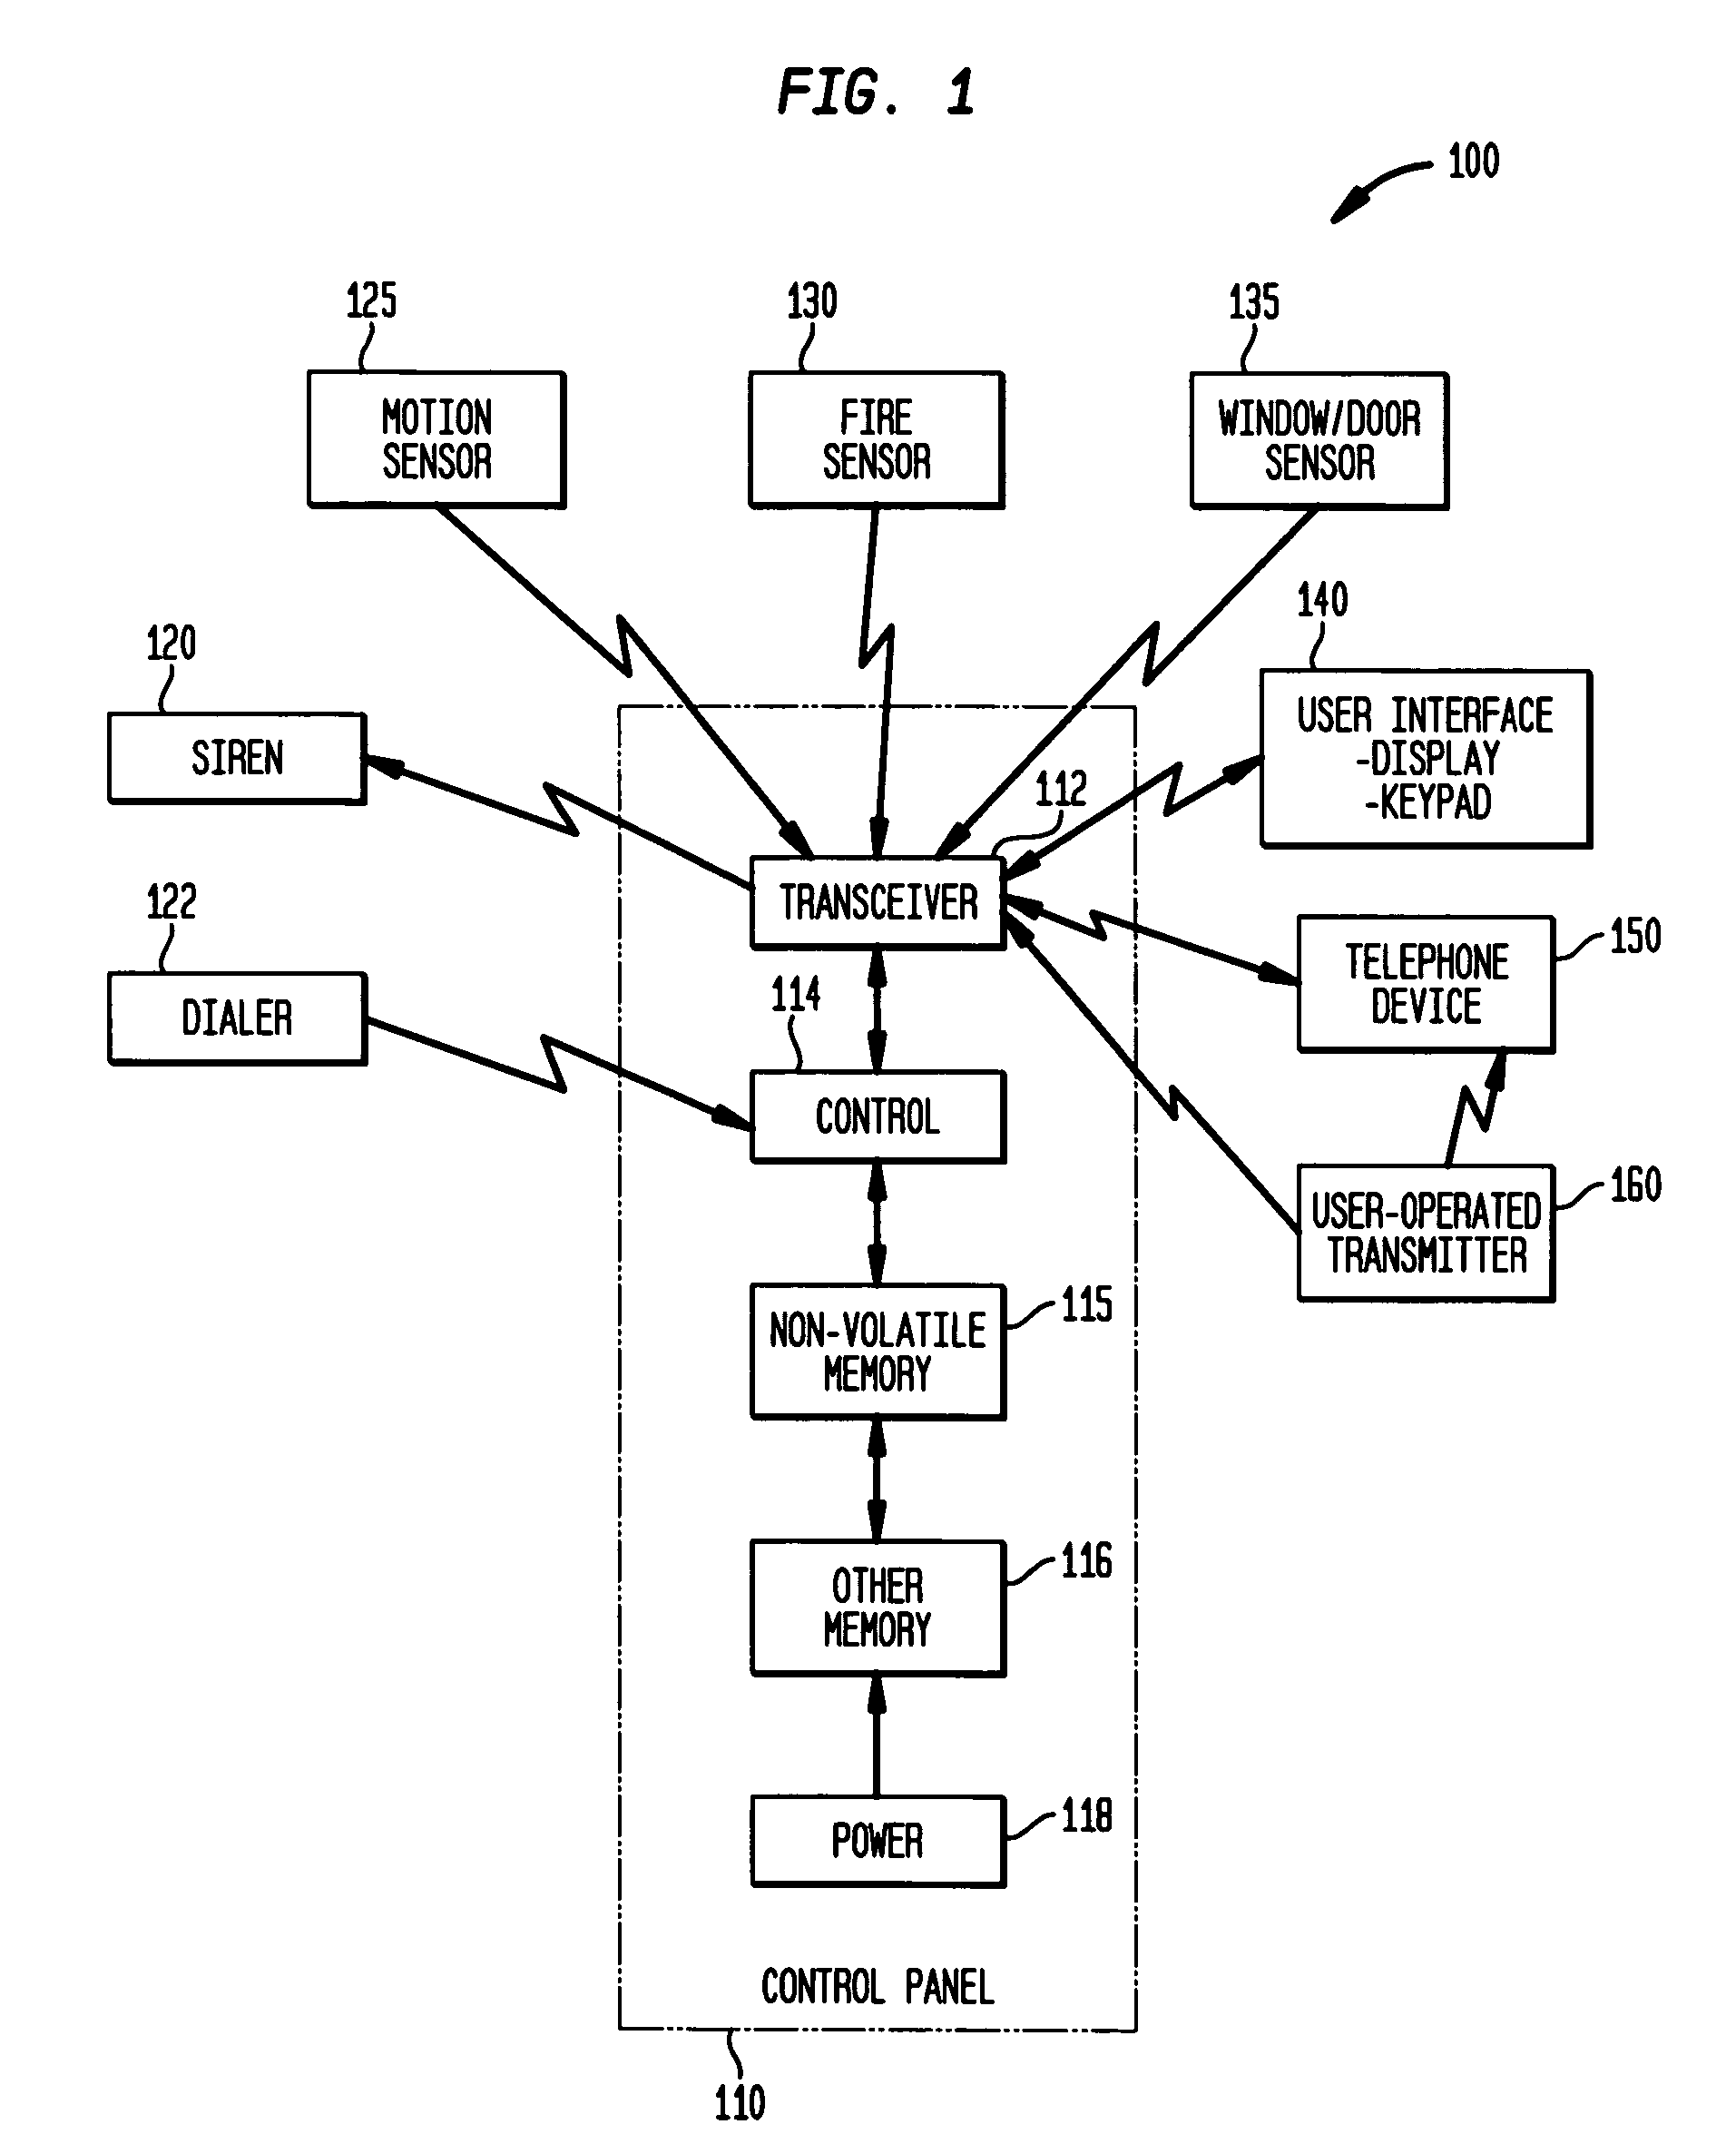 Remote control of a speaker phone device as a standalone device or as part of a security system